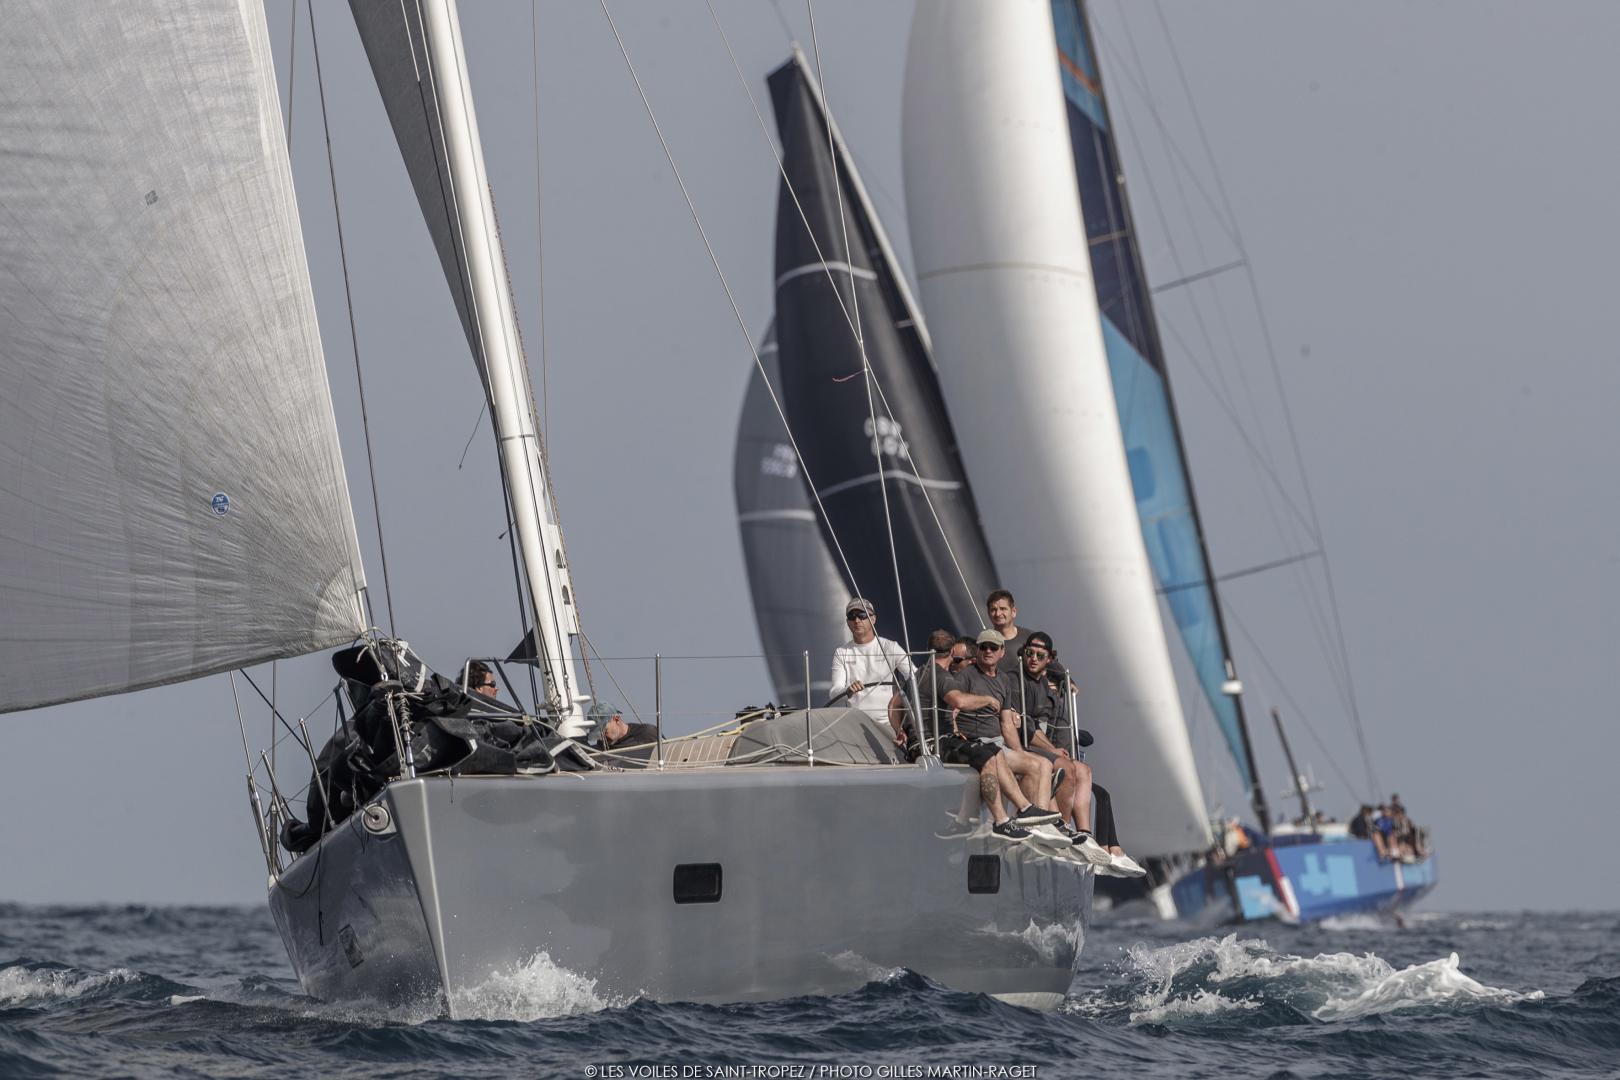 International Maxi Association President Benoît de Froidmont's Wallyño came out in top in today's final race.